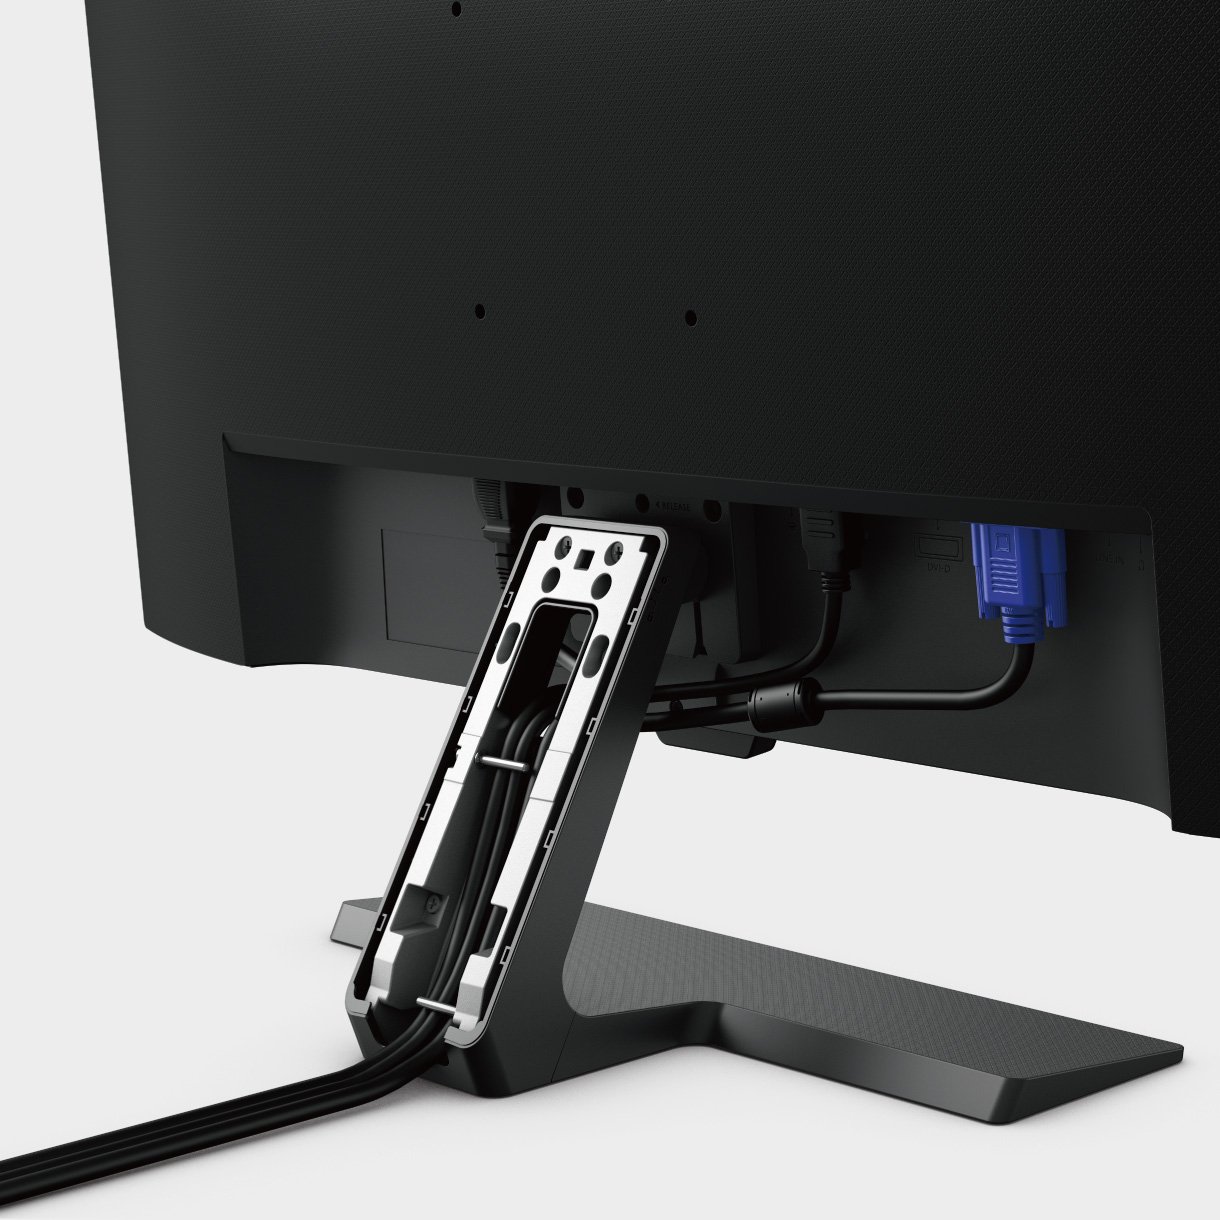 benq gw2381 with invisible cable management system hides all wires inside the monitor stand for cleanest look